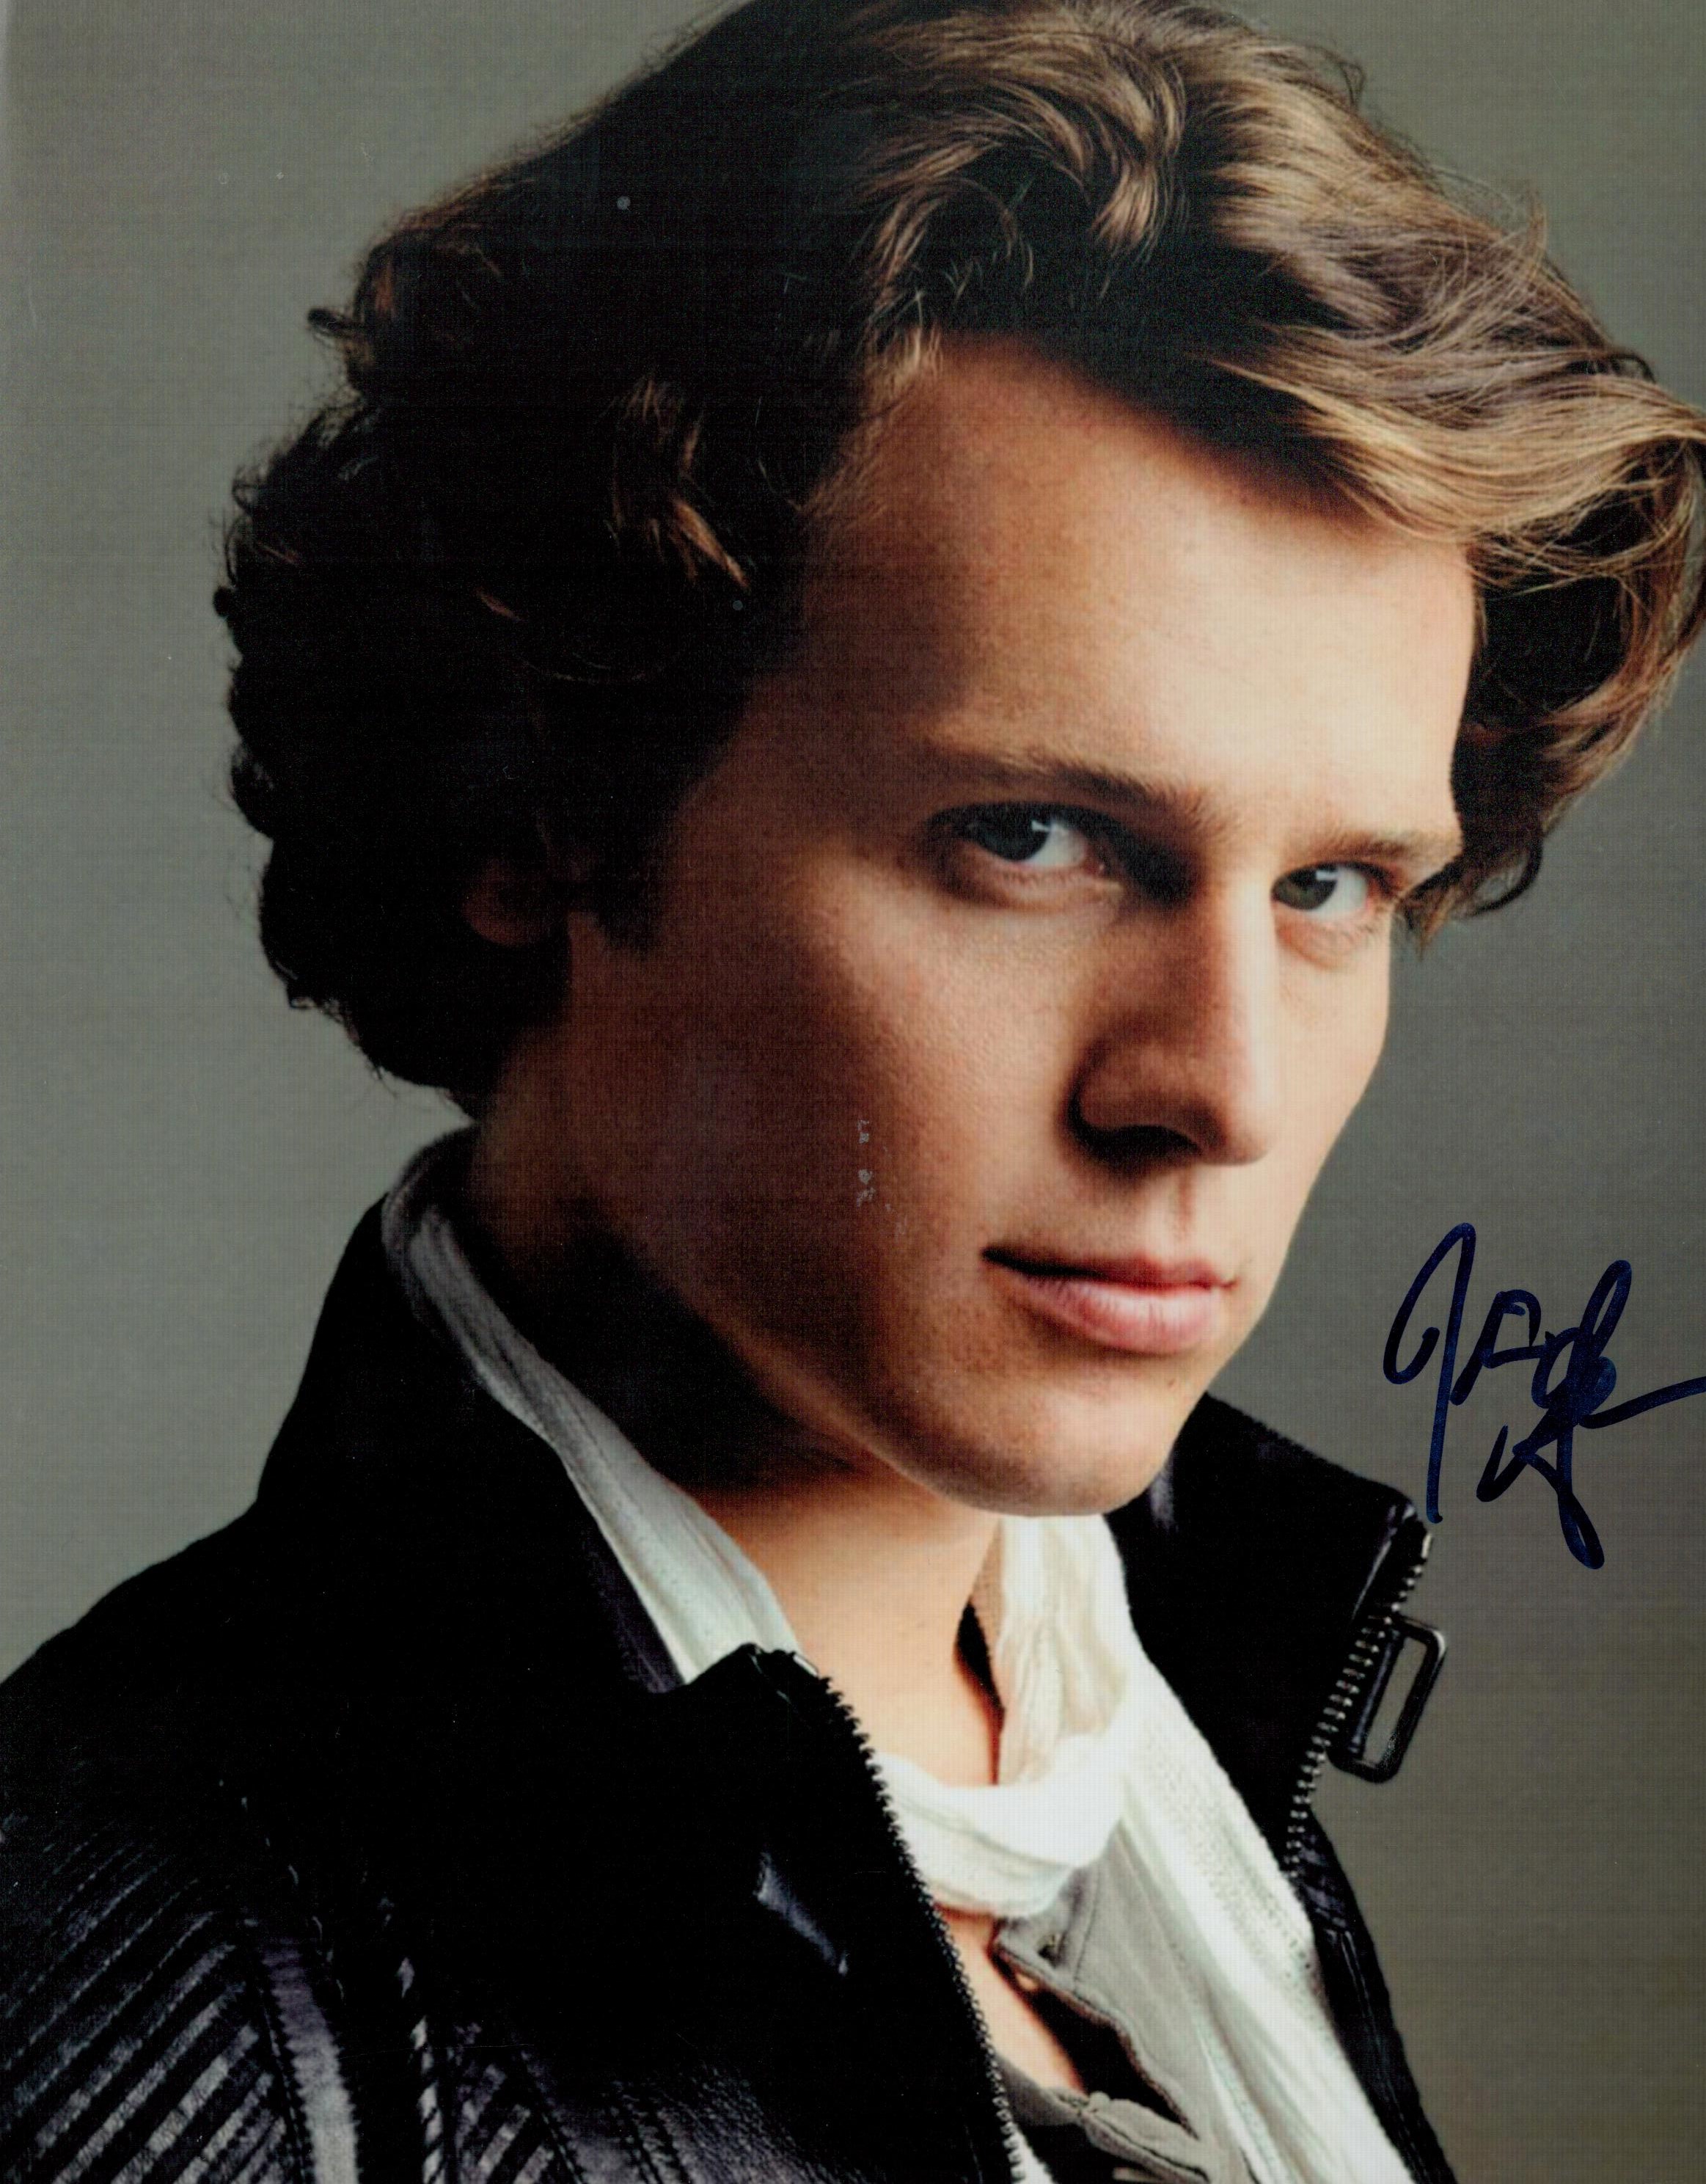 Jonathan Groff signed 10x8 colour photo. Groff is an American actor and singer. He began his